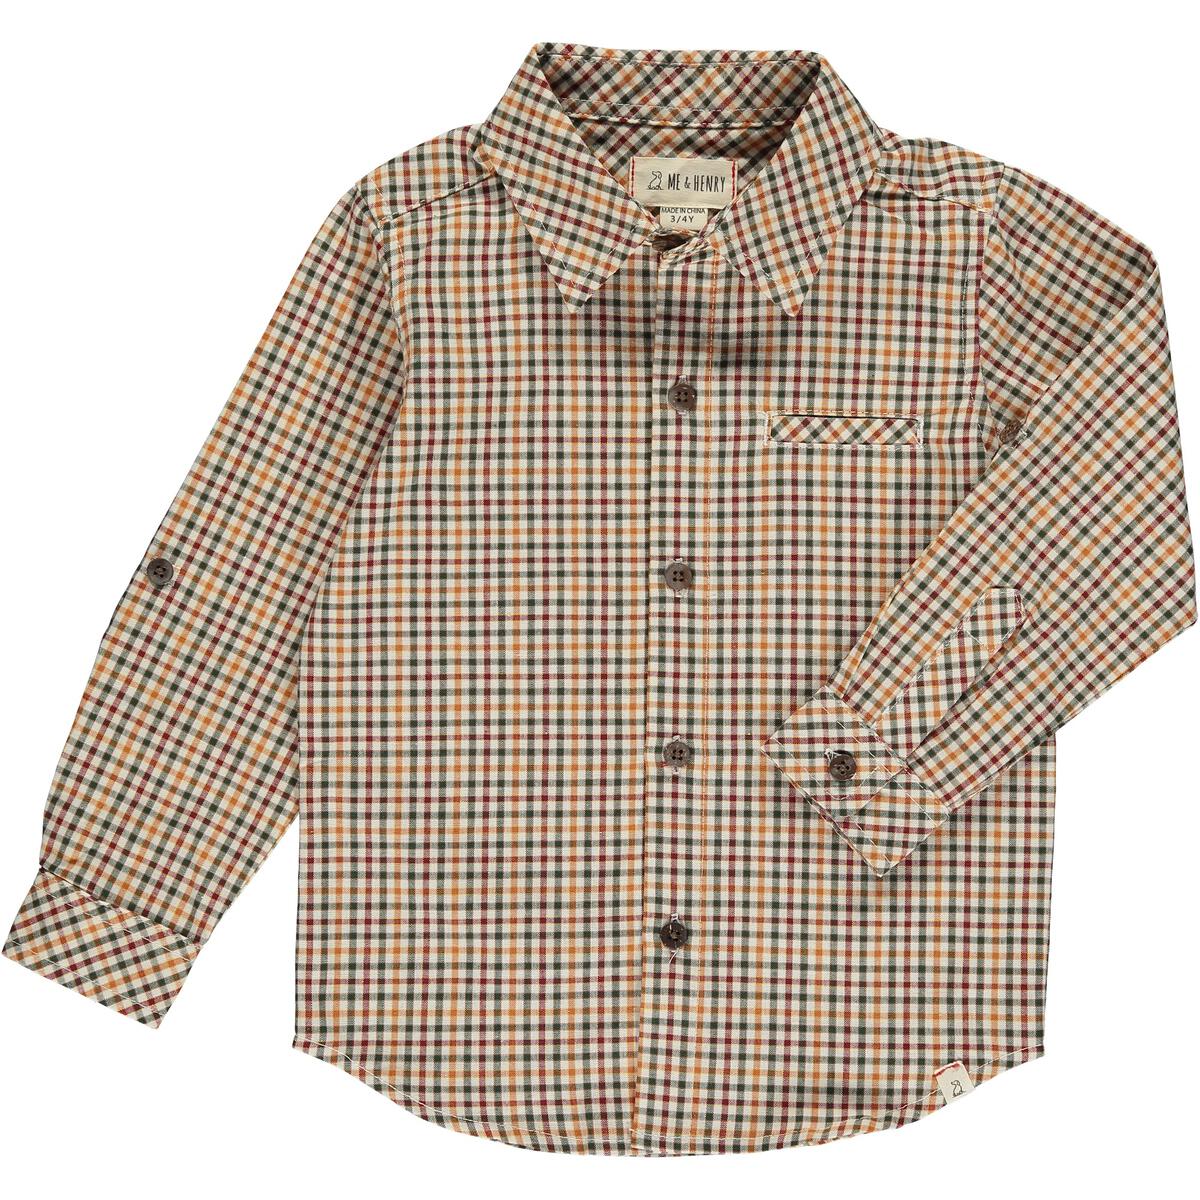 atwood navy/gold plaid woven shirt